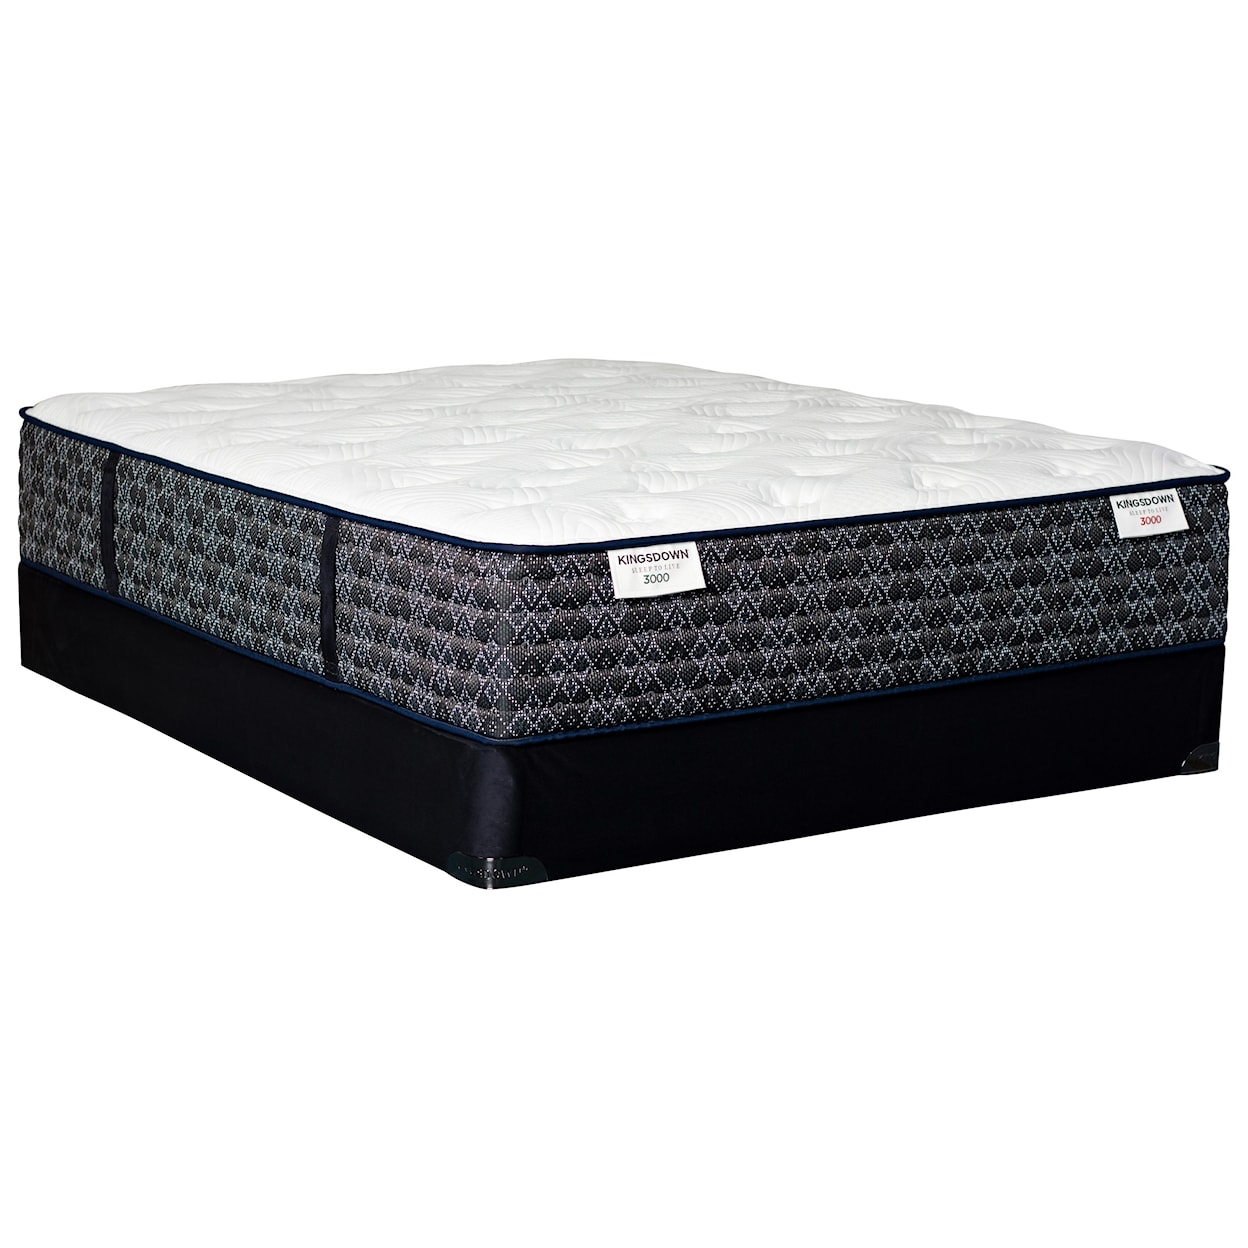 Kingsdown Sleep to Live 3000 Gold Blue Queen Pocketed Coil Mattress LoPro Set